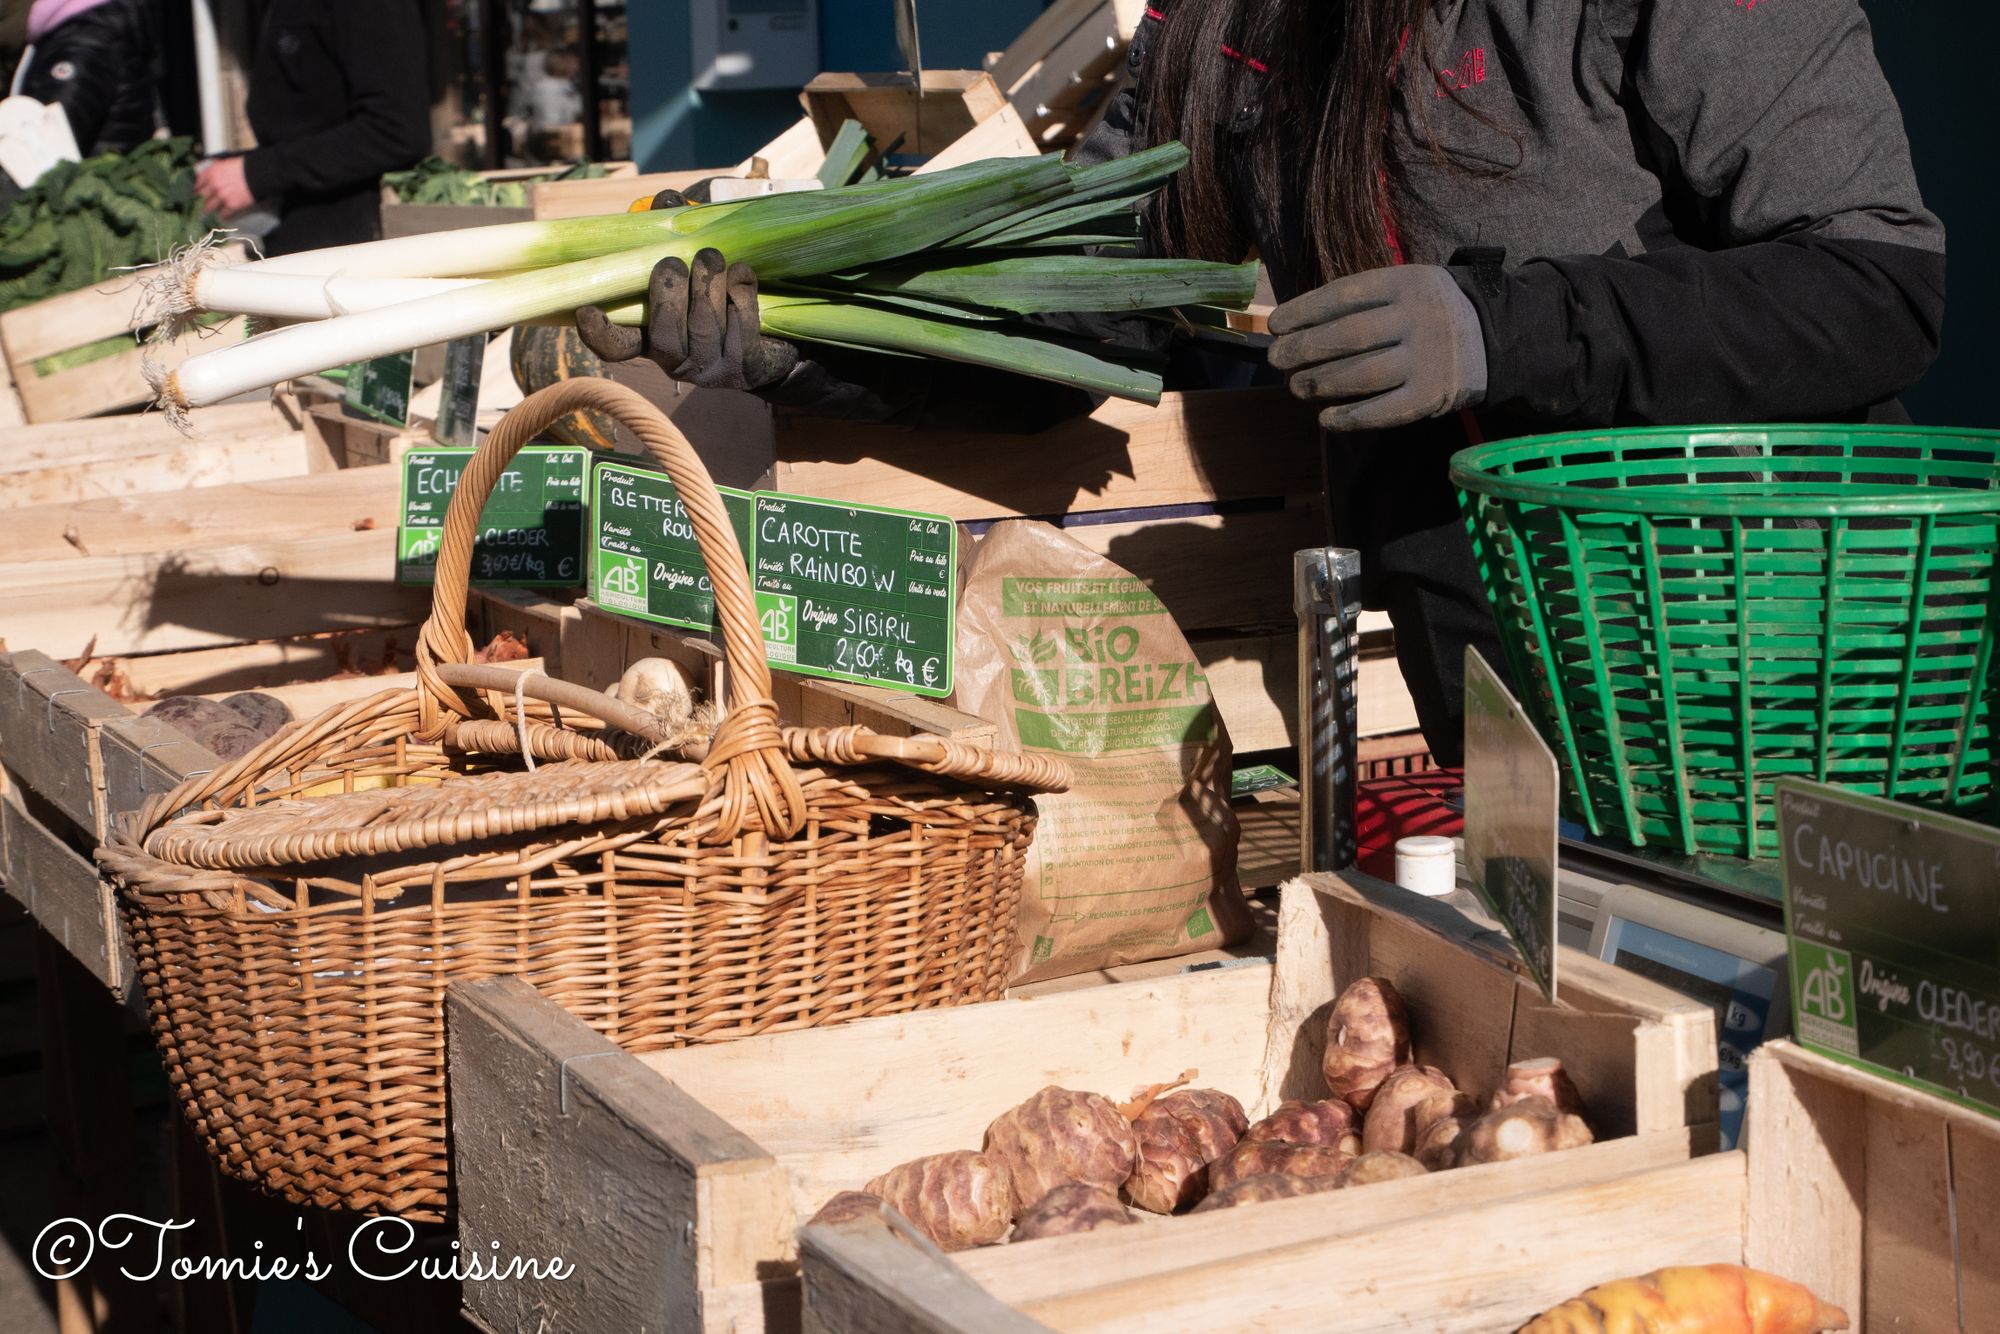 This farmer's stall puts the veggies directly in your bag